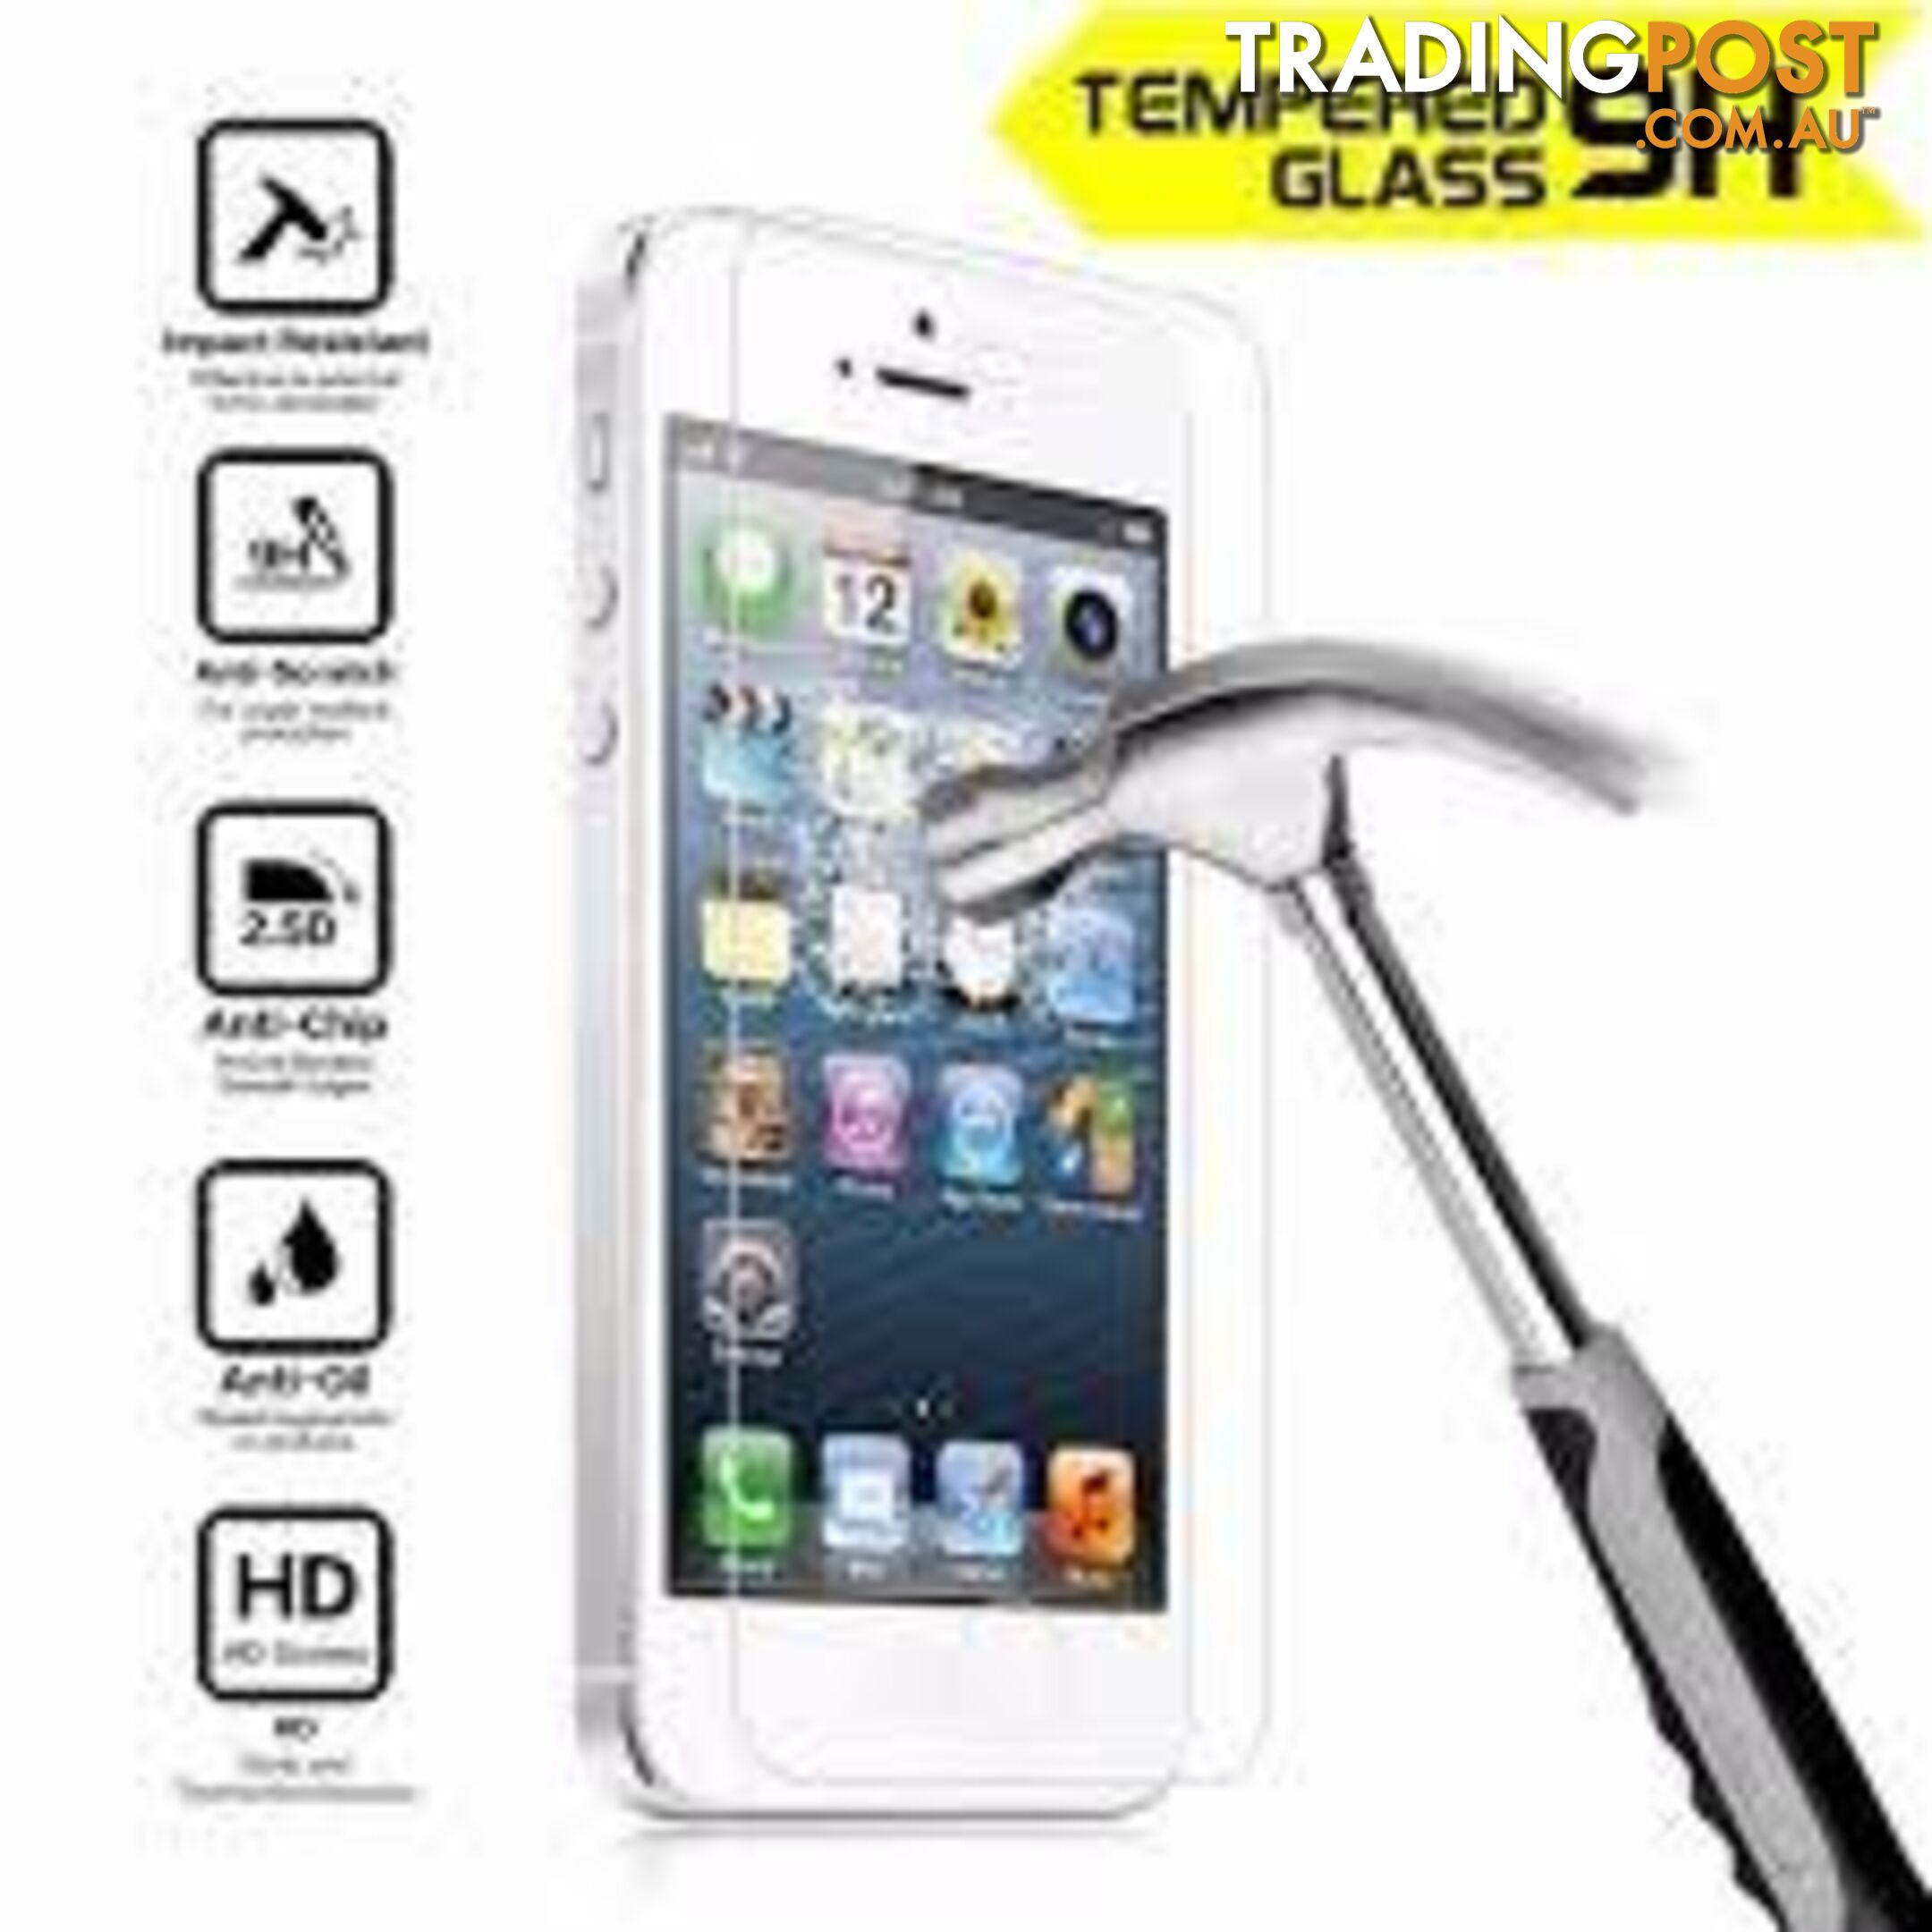 iPhone Premium Tempered Glass Screen Protector - 5BD659 - Tempered Glass